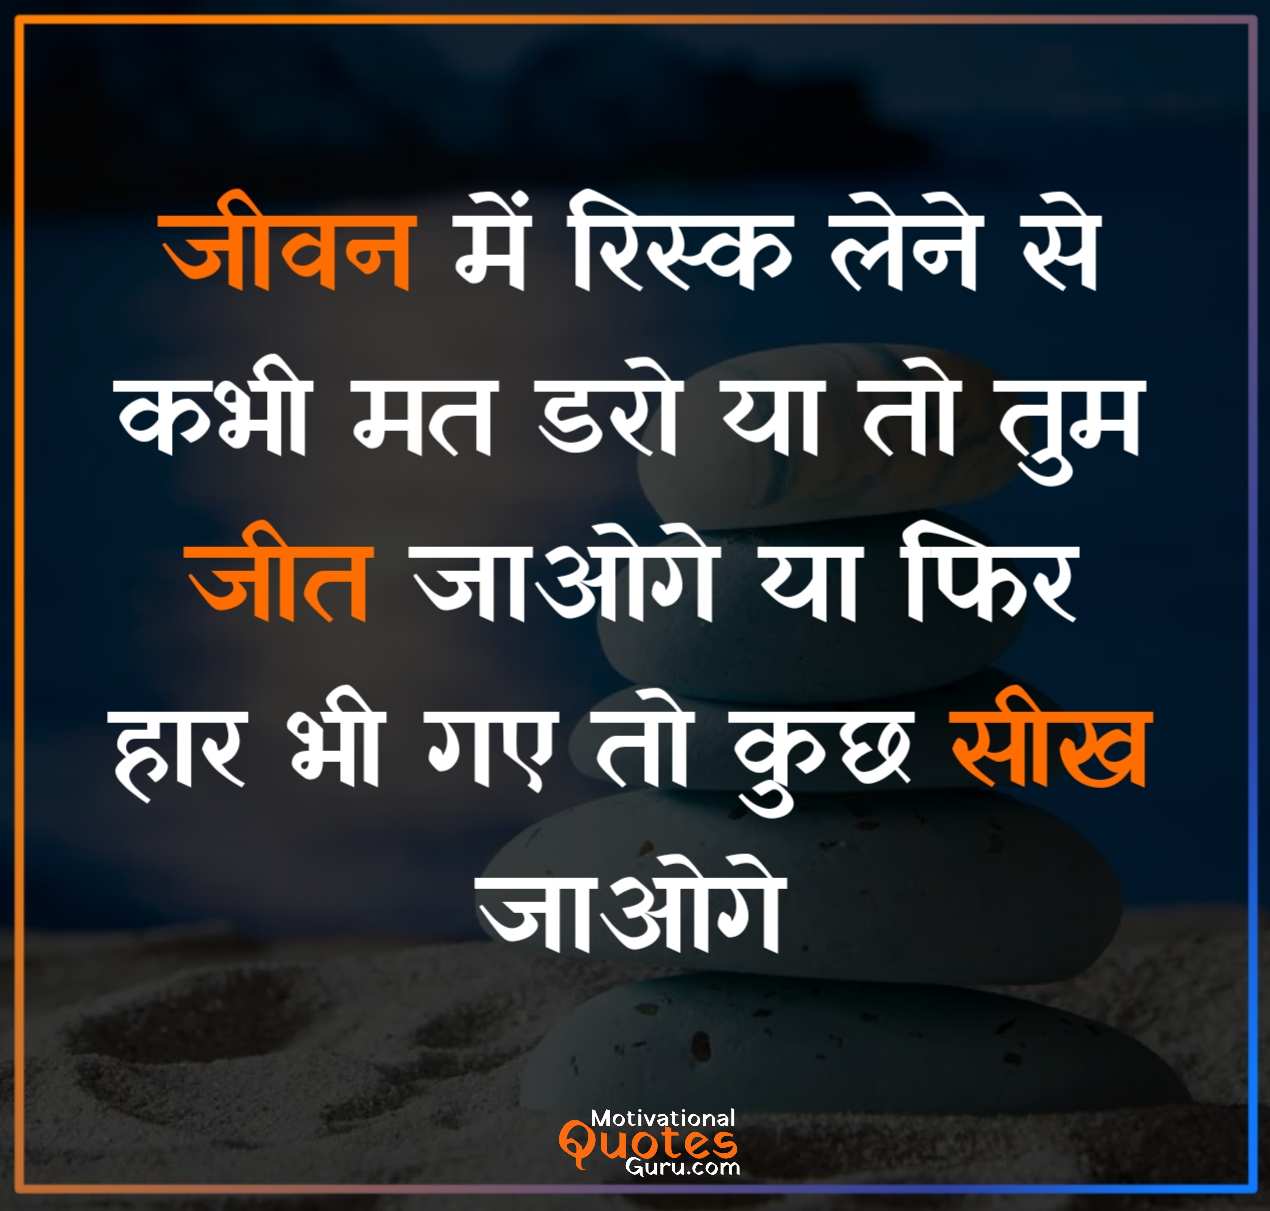 quotes about life in hindi